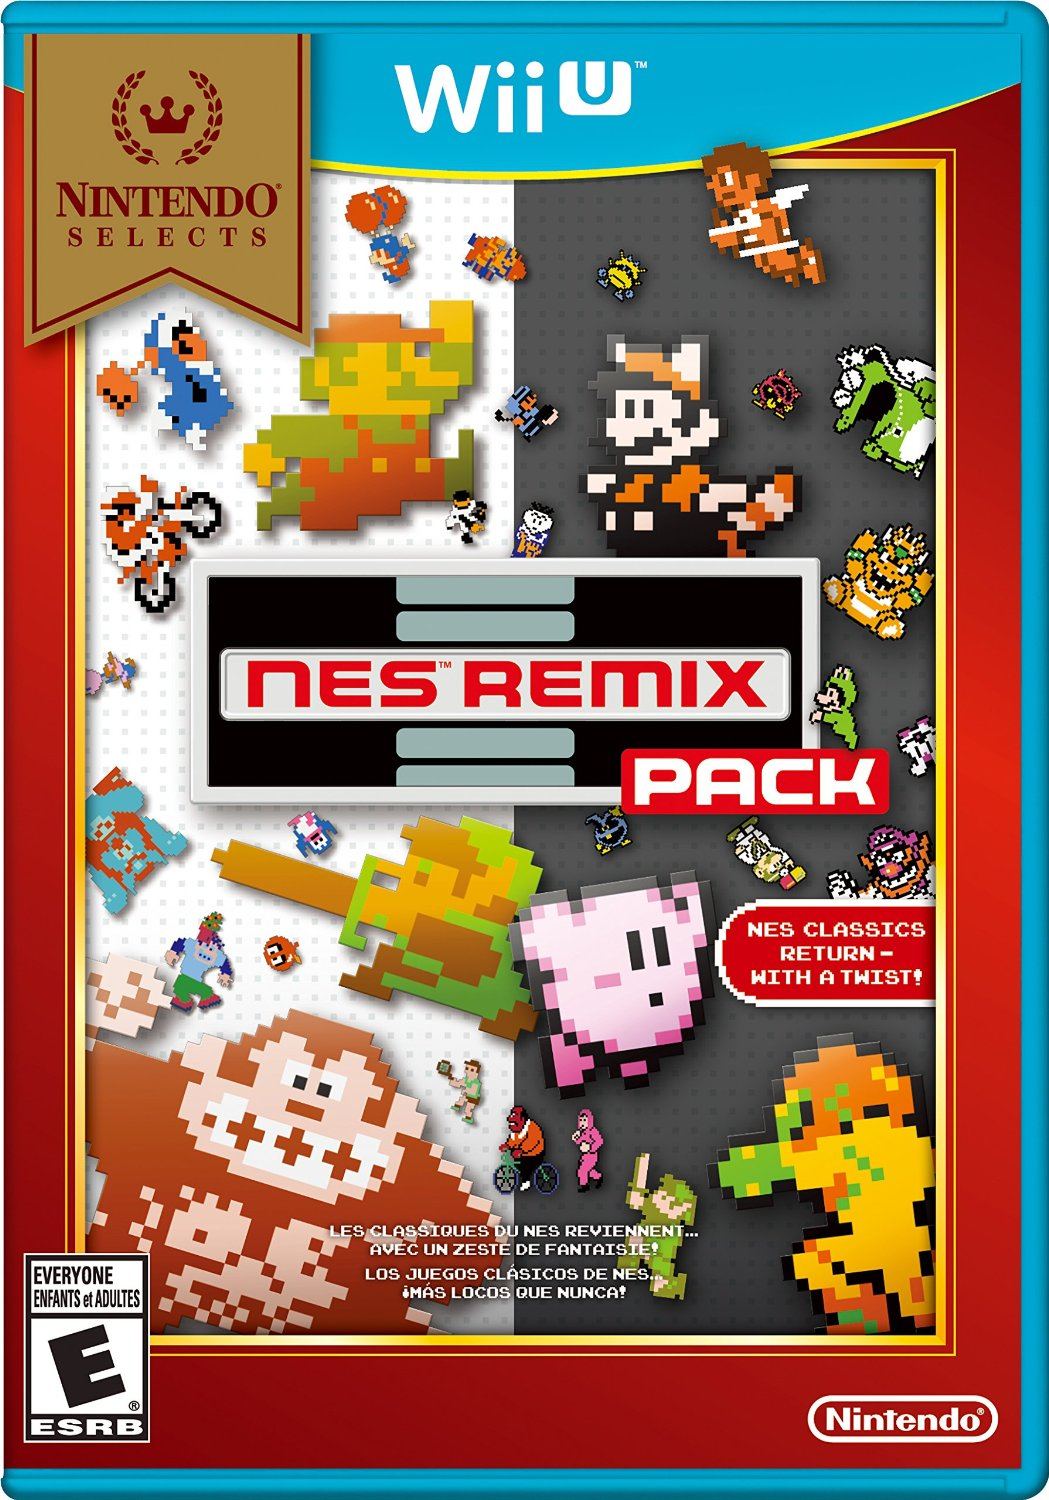 NES Remix Pack (Nintendo Selects) (US)